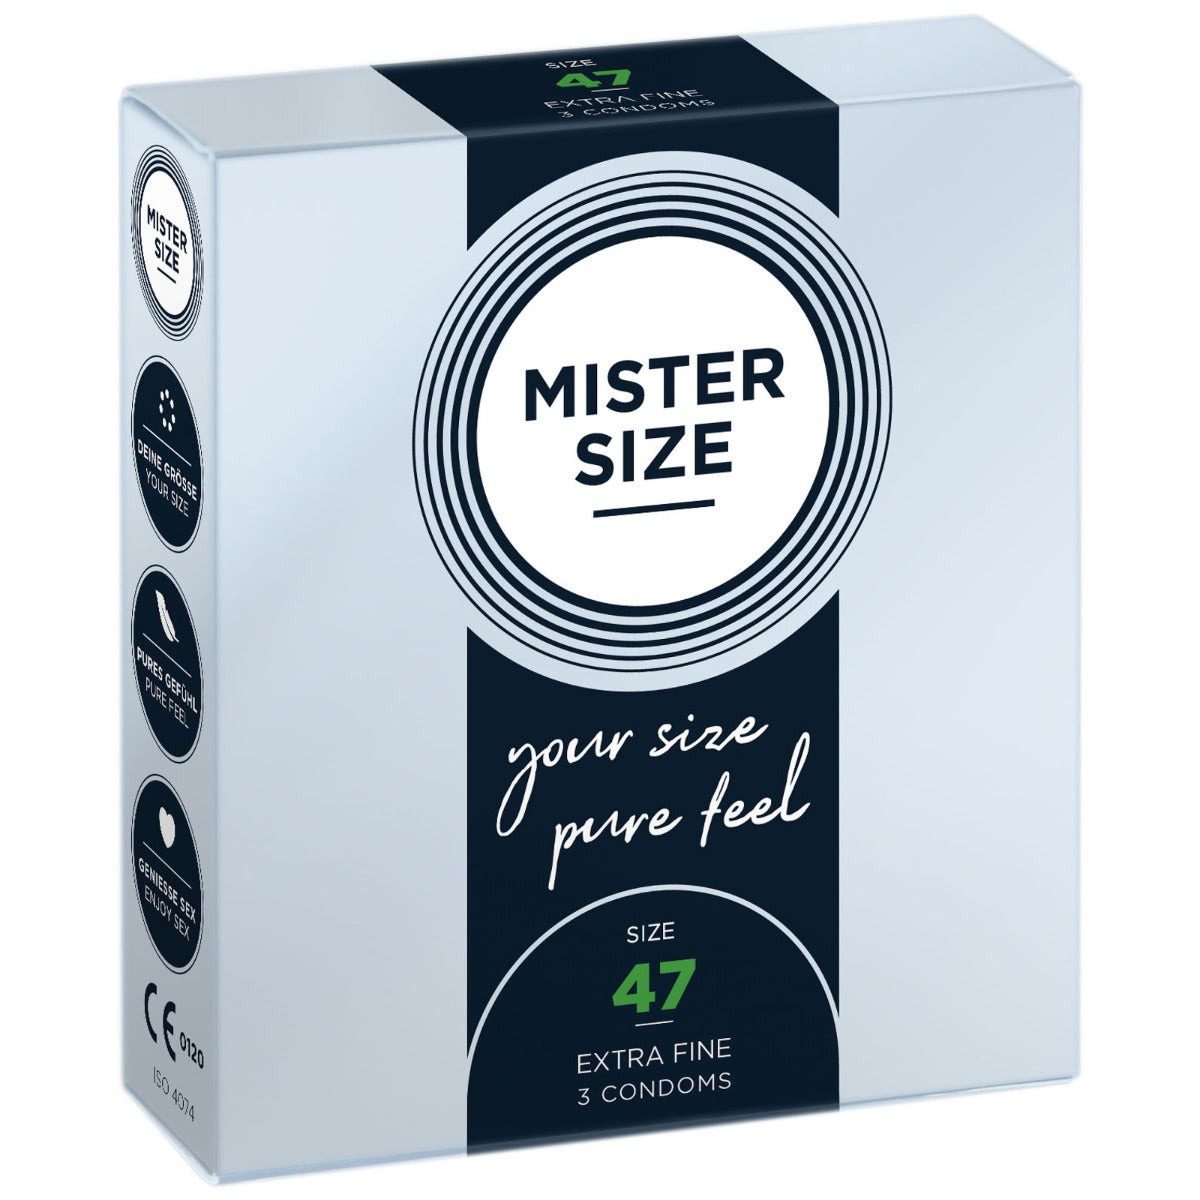 Mister Size Pure Feel Condoms 47mm (8085938307311)